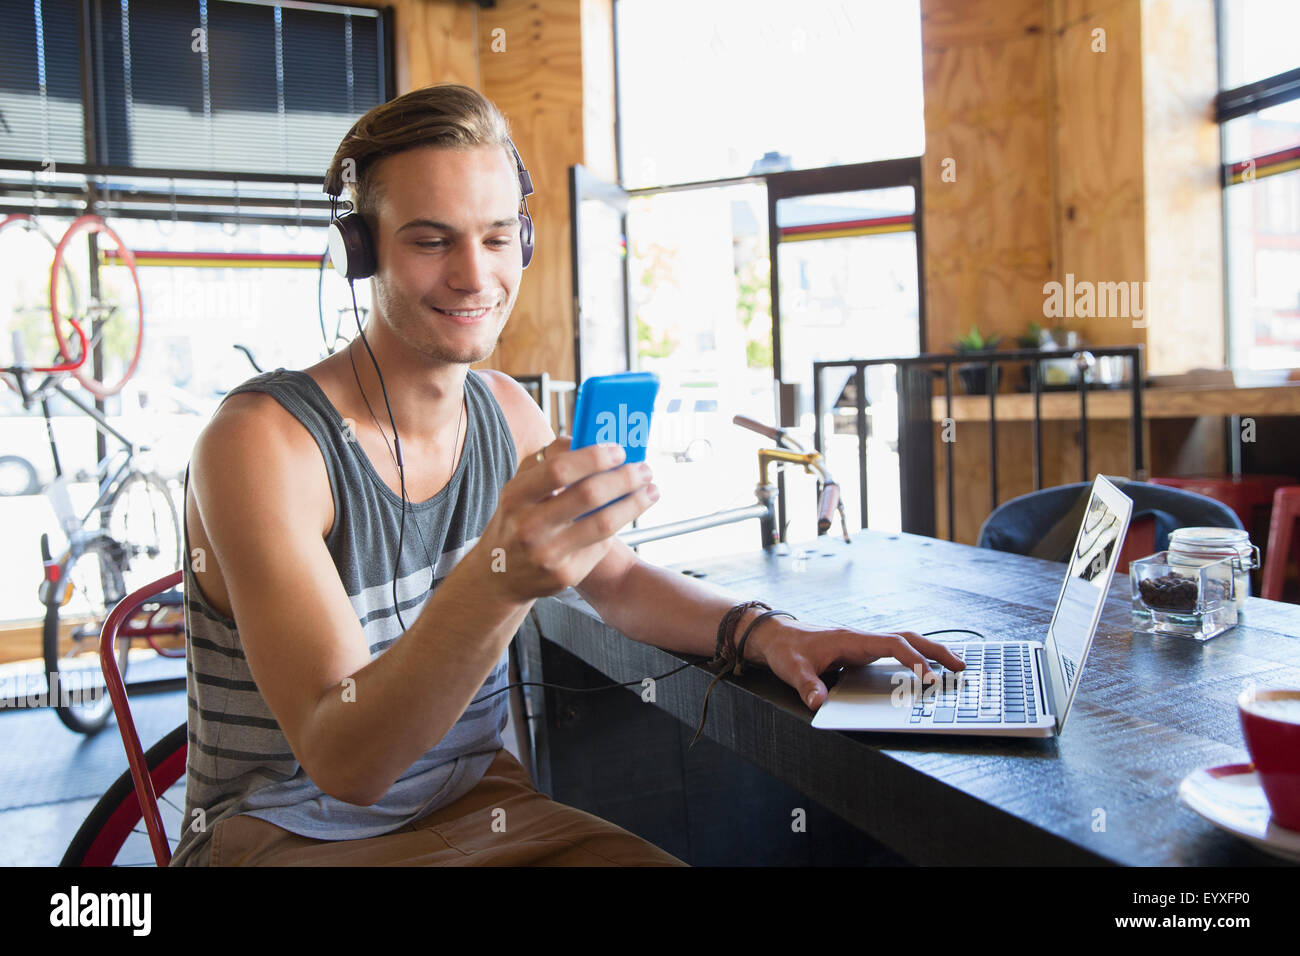 Smiling Young man with headphones texting with cell phone at laptop in cafe Banque D'Images